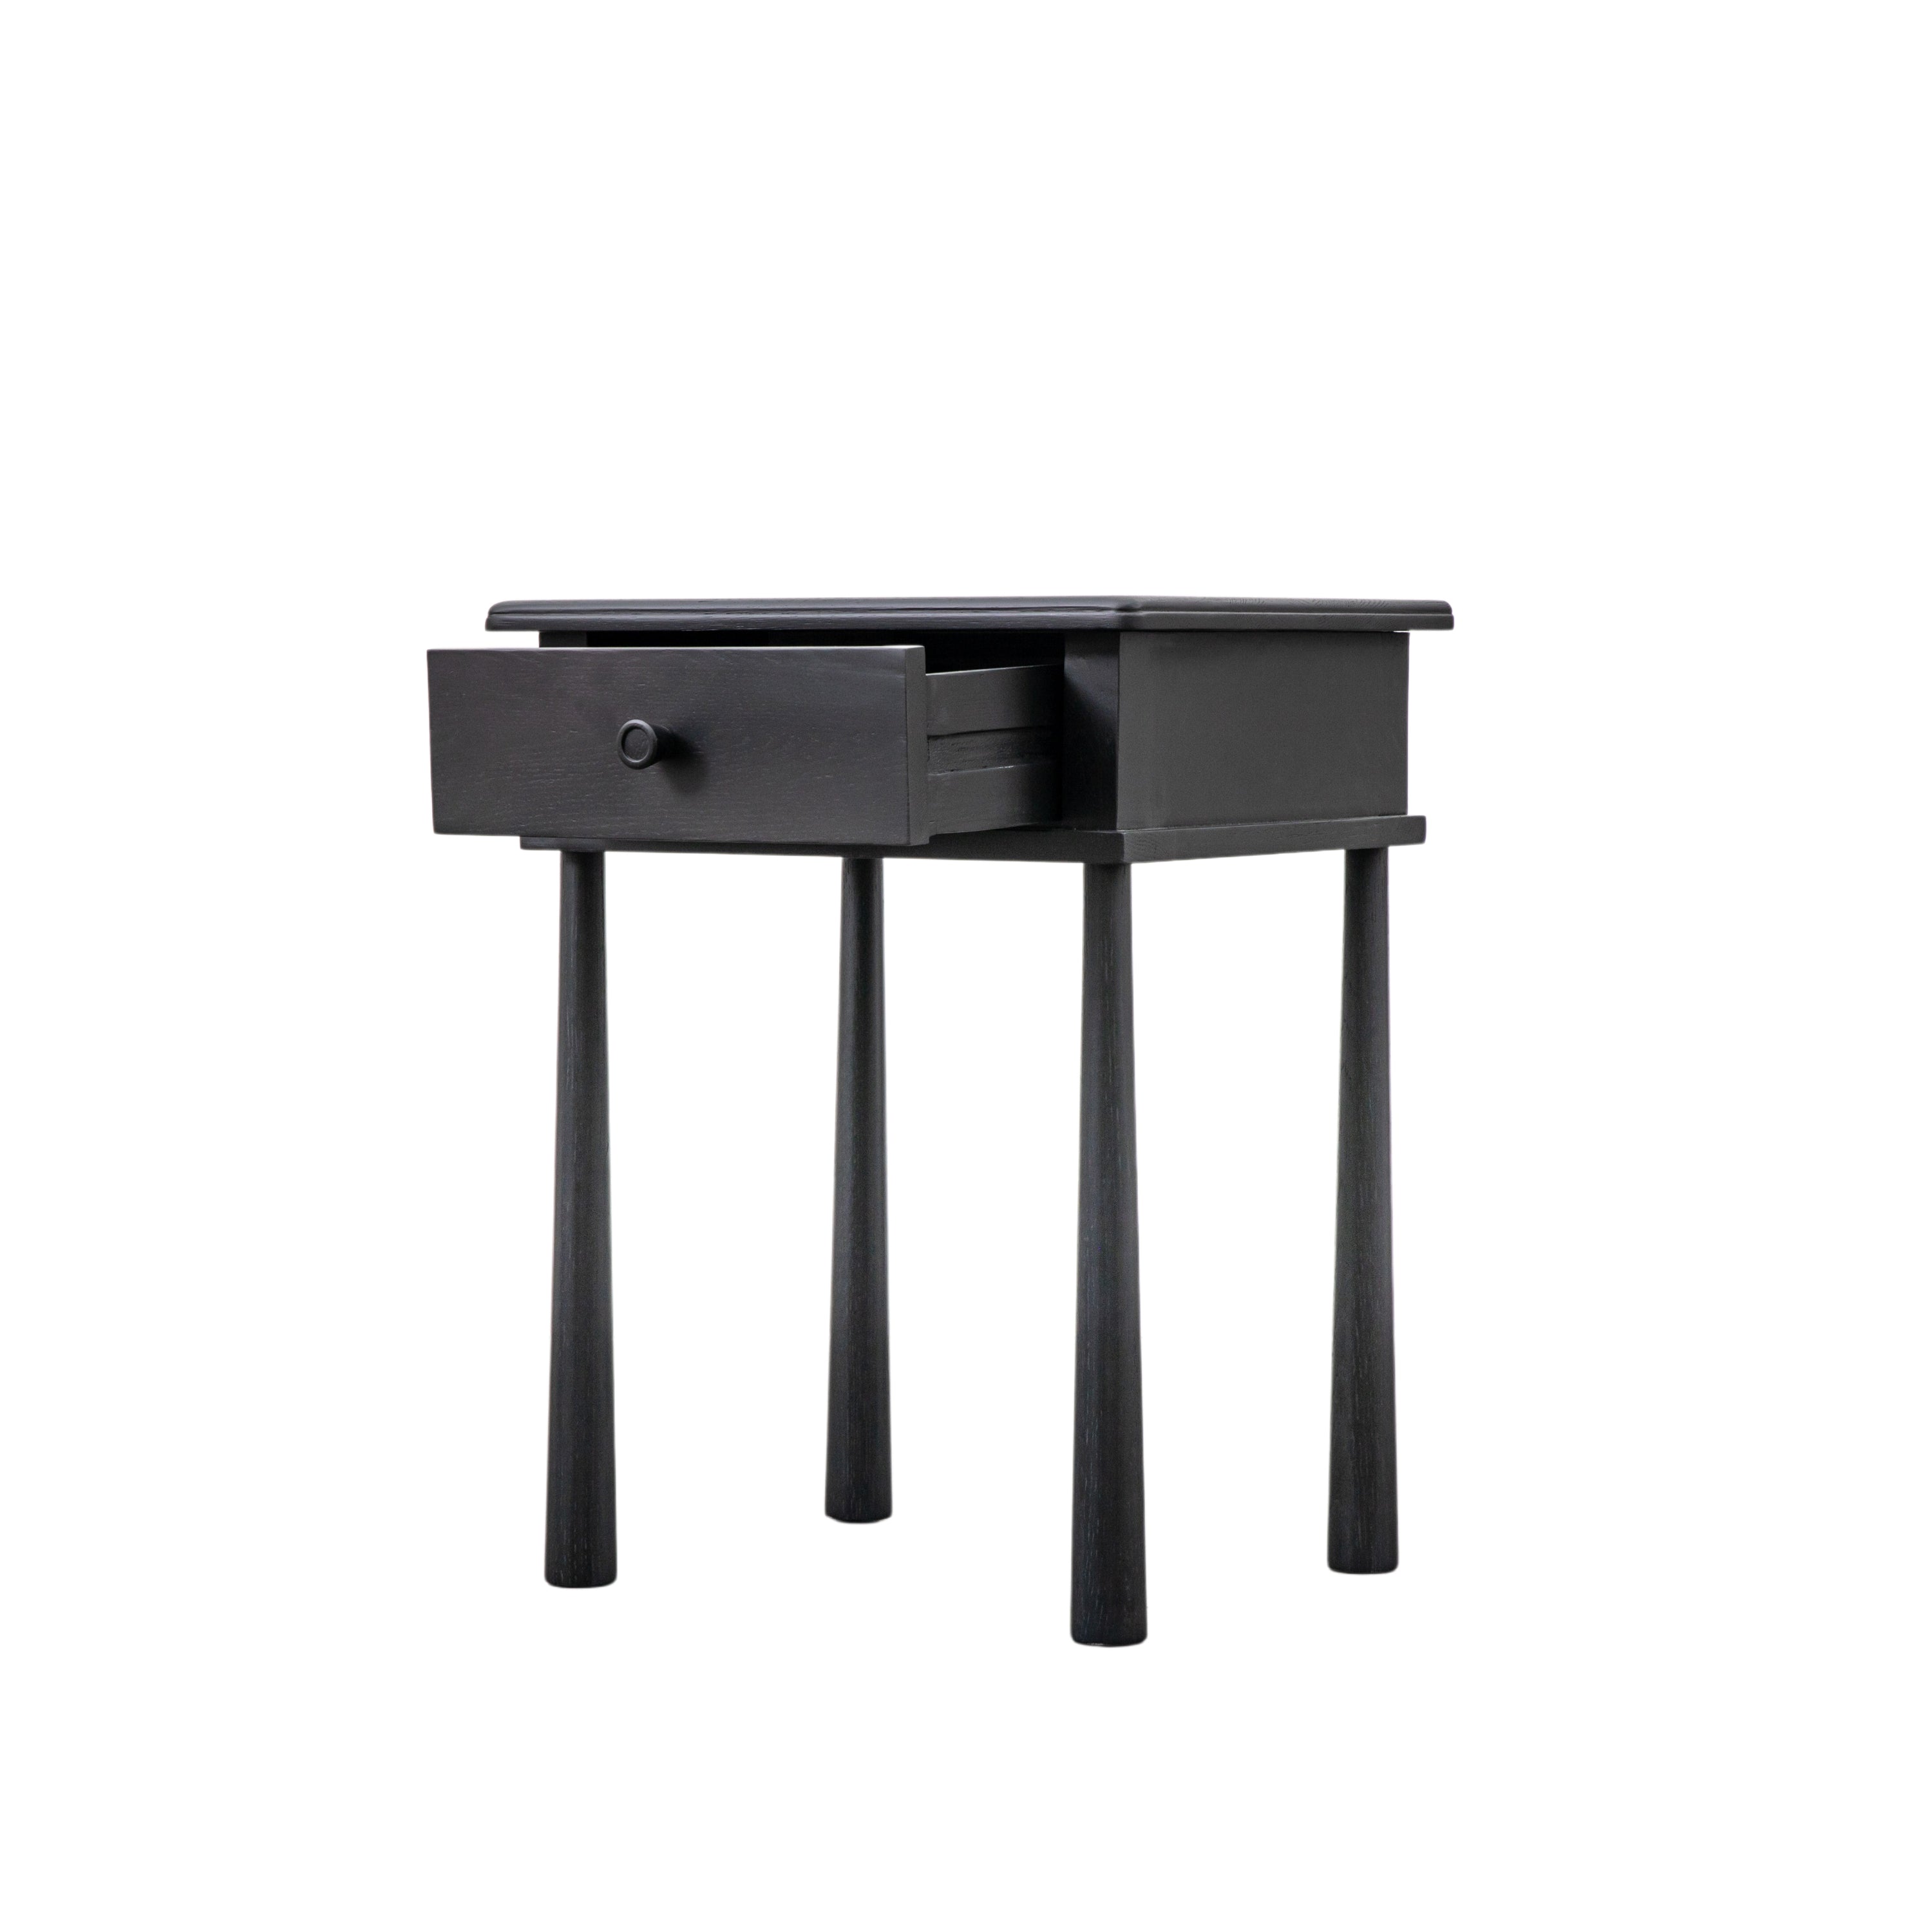 Axel Nordic style black bedside table with pull out drawer | MalletandPlane.com